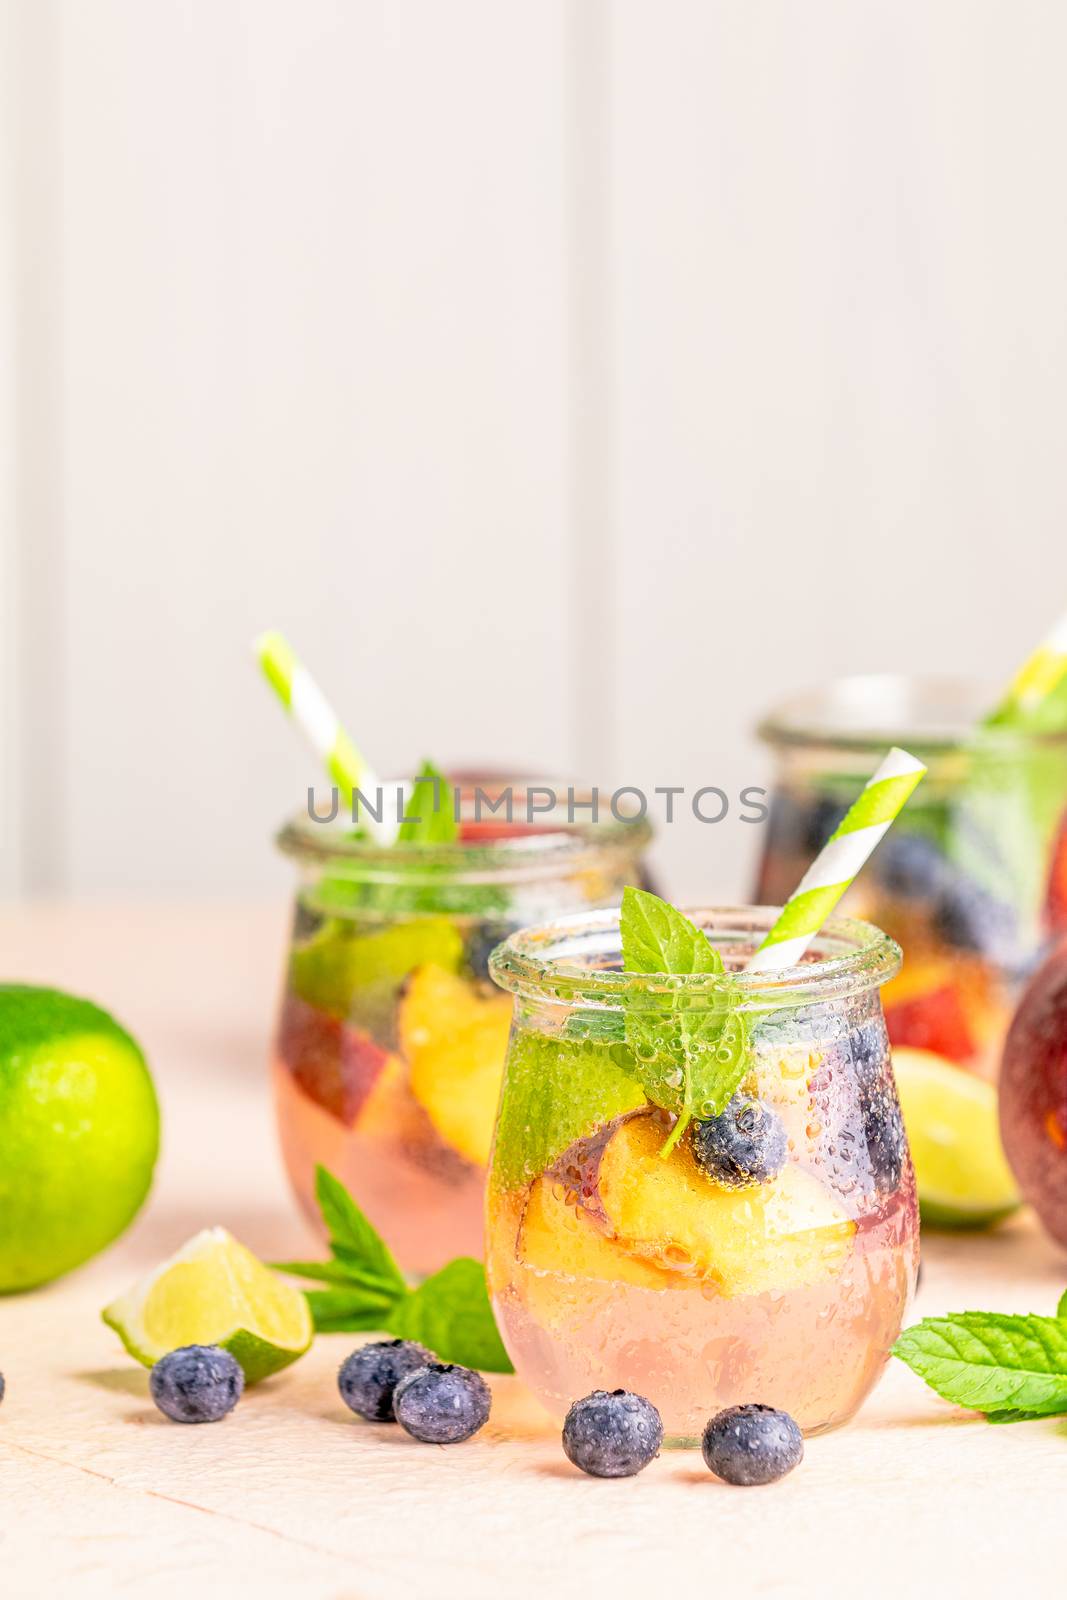 Blueberry and peach infused water, cocktail, lemonade or tea in  by ArtSvitlyna